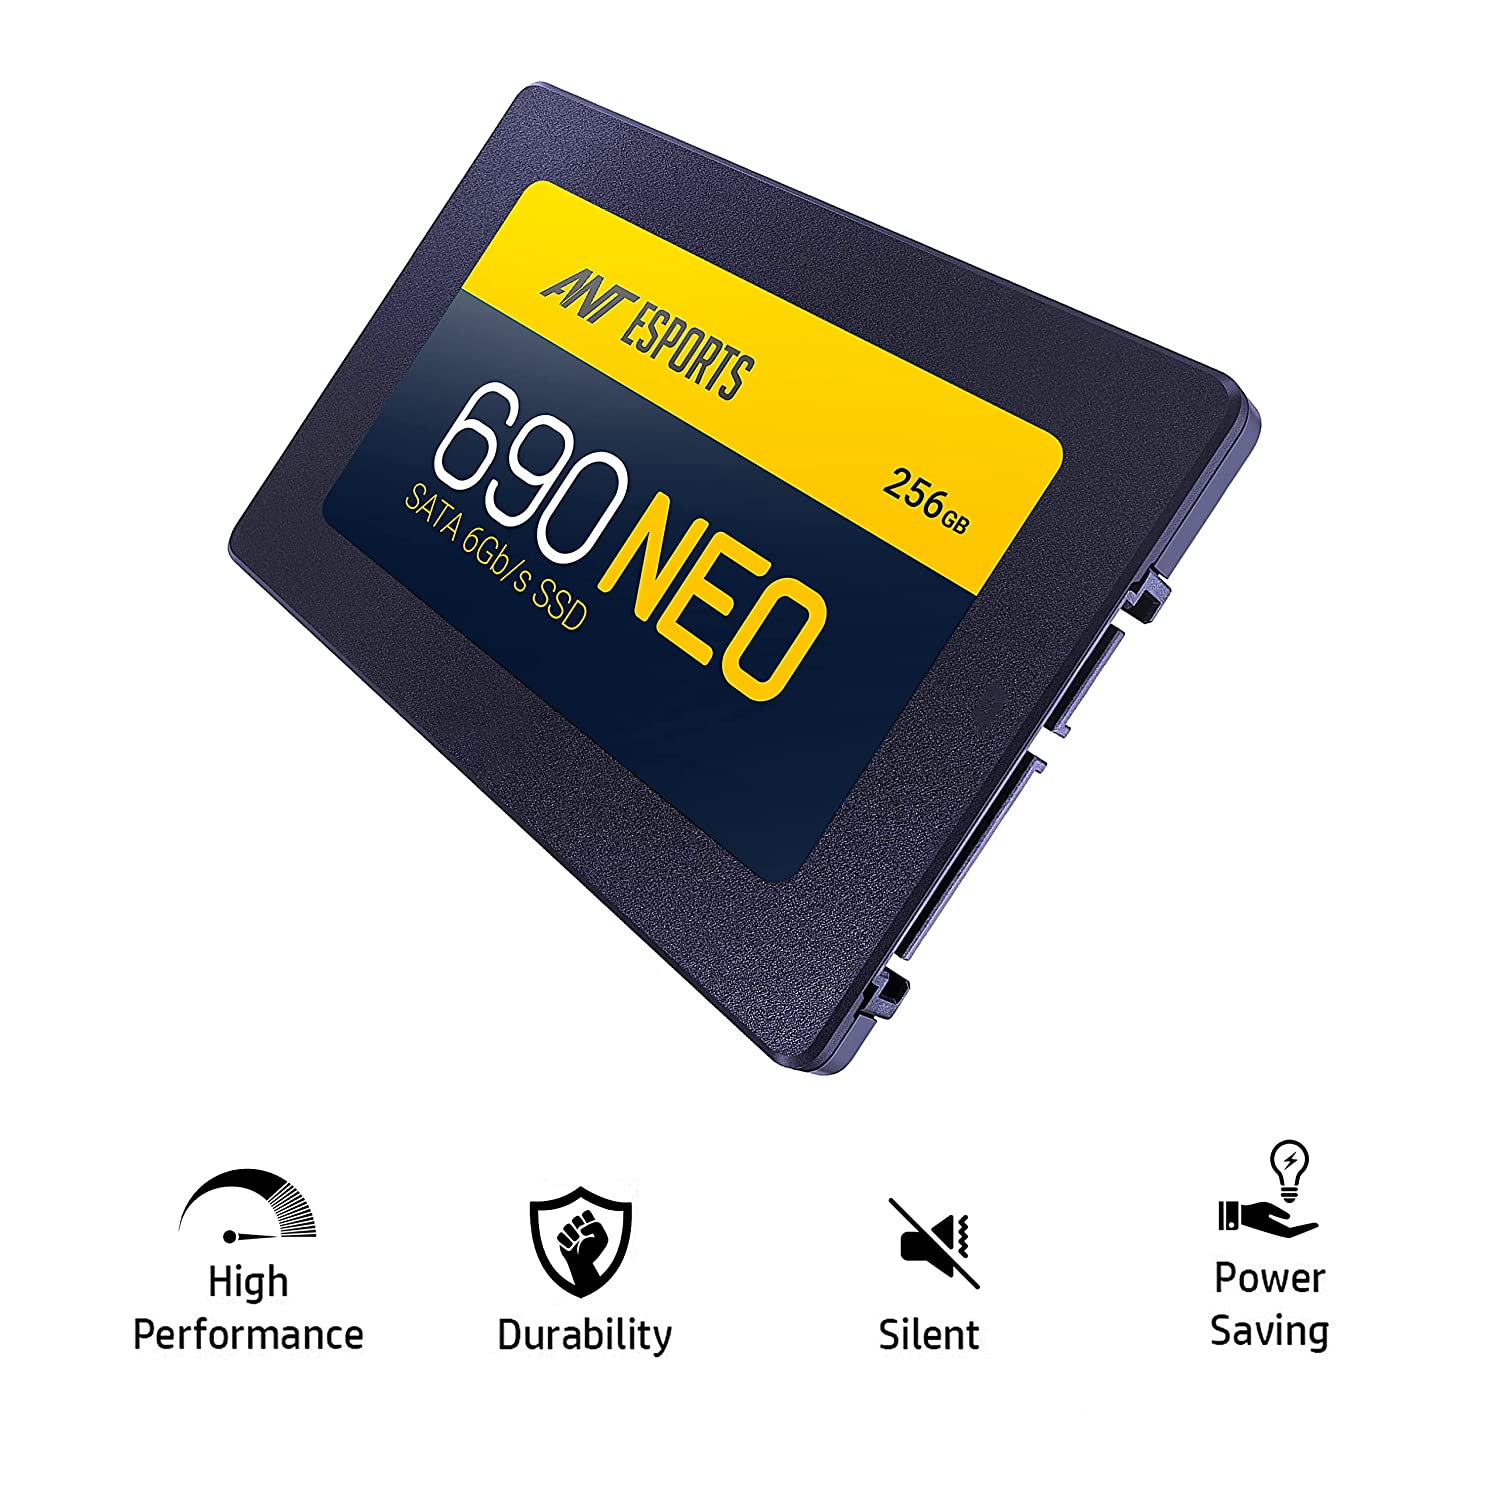 ANT Esports Neo 690 Sata SSD 256GB SSD,Ultra Low Power Consumption